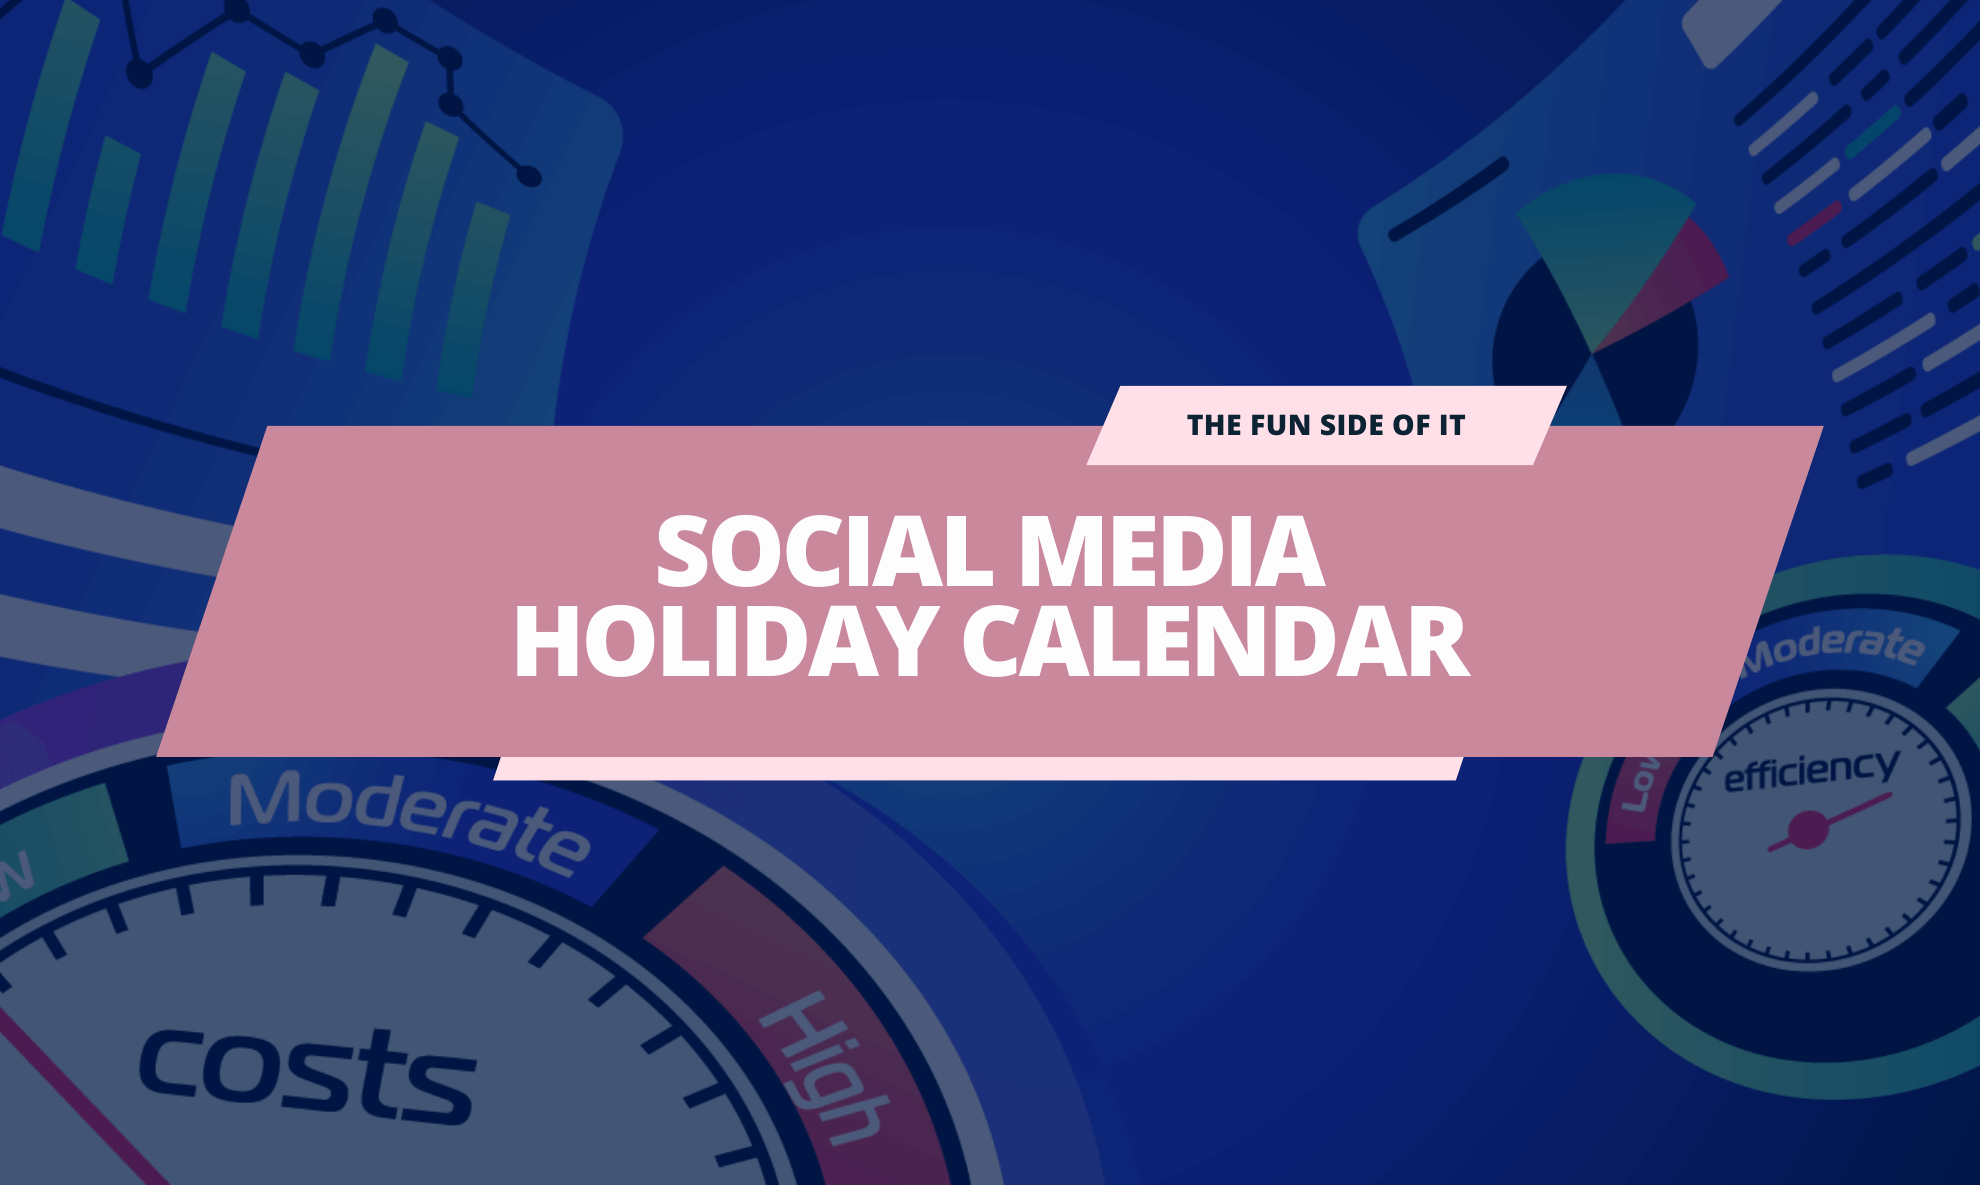 Social Media Holiday Calendar for service providers and MSPs